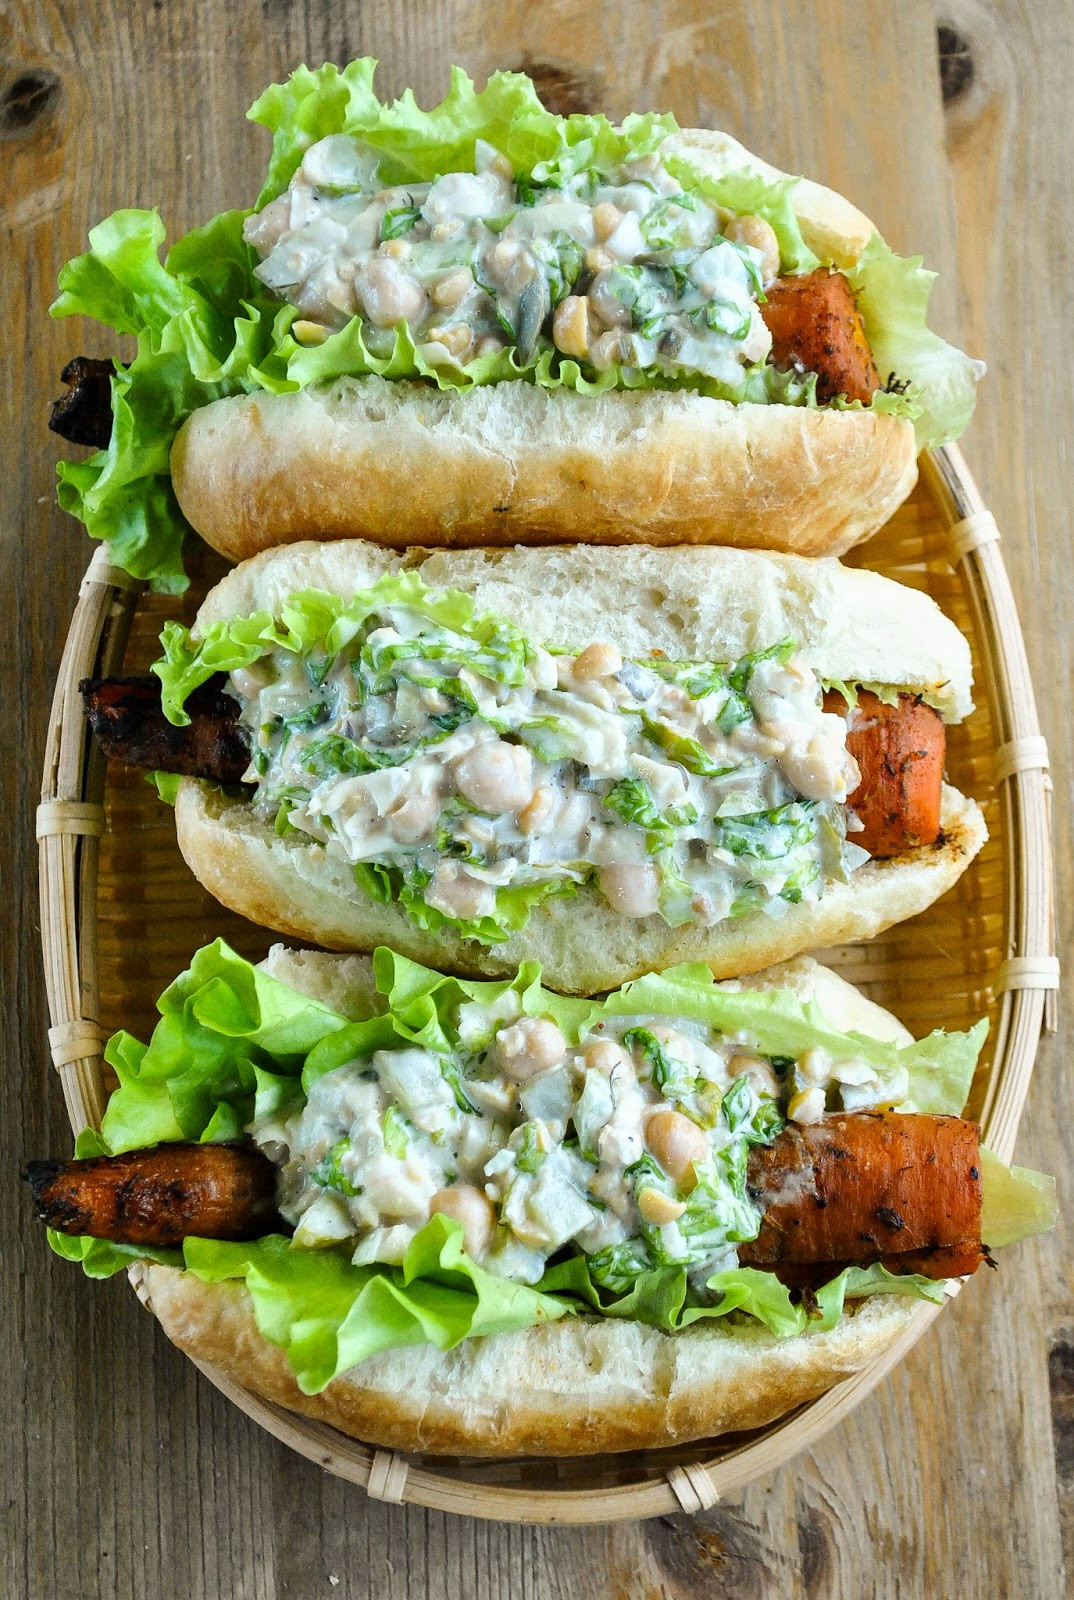 Vegan Gourmet Recipes
 Smoky barbecue carrot hot dogs with creamy chickpea salad